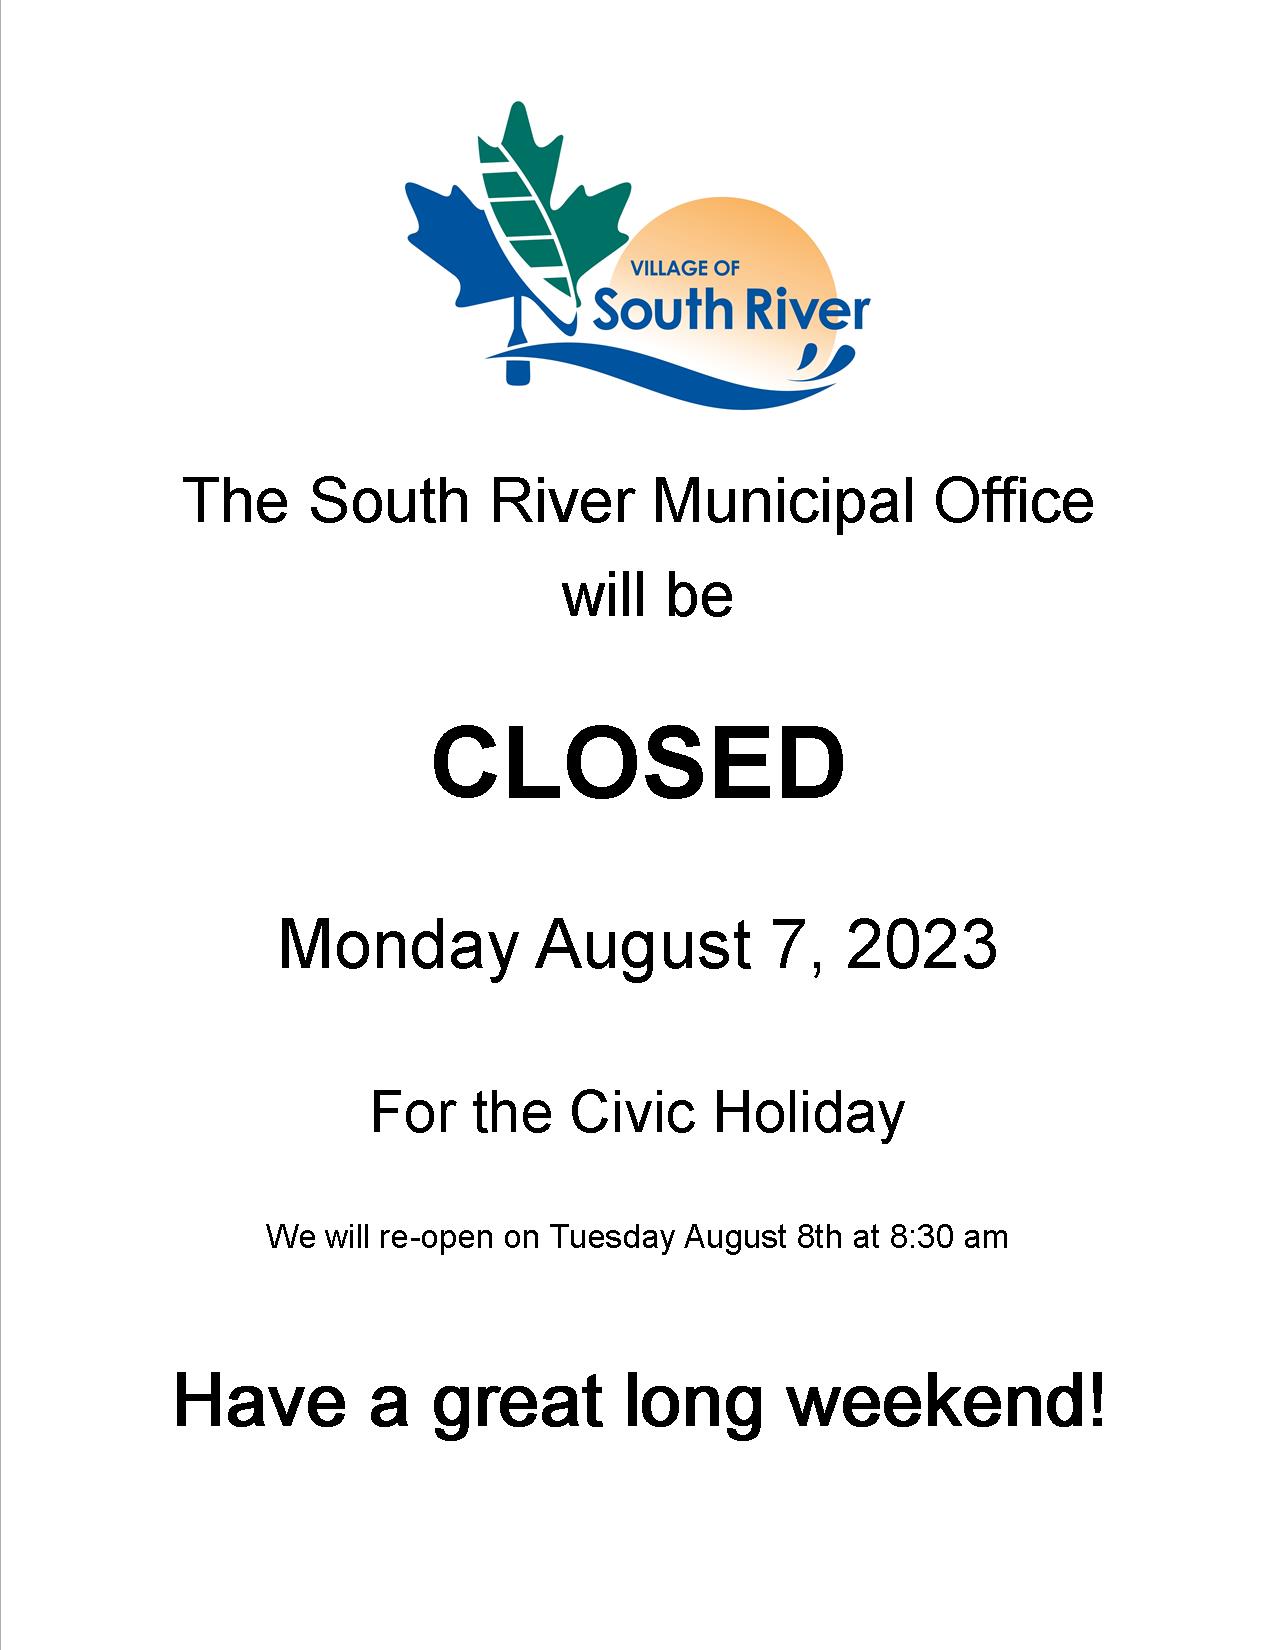 Office Closure for Civic Holiday Notice